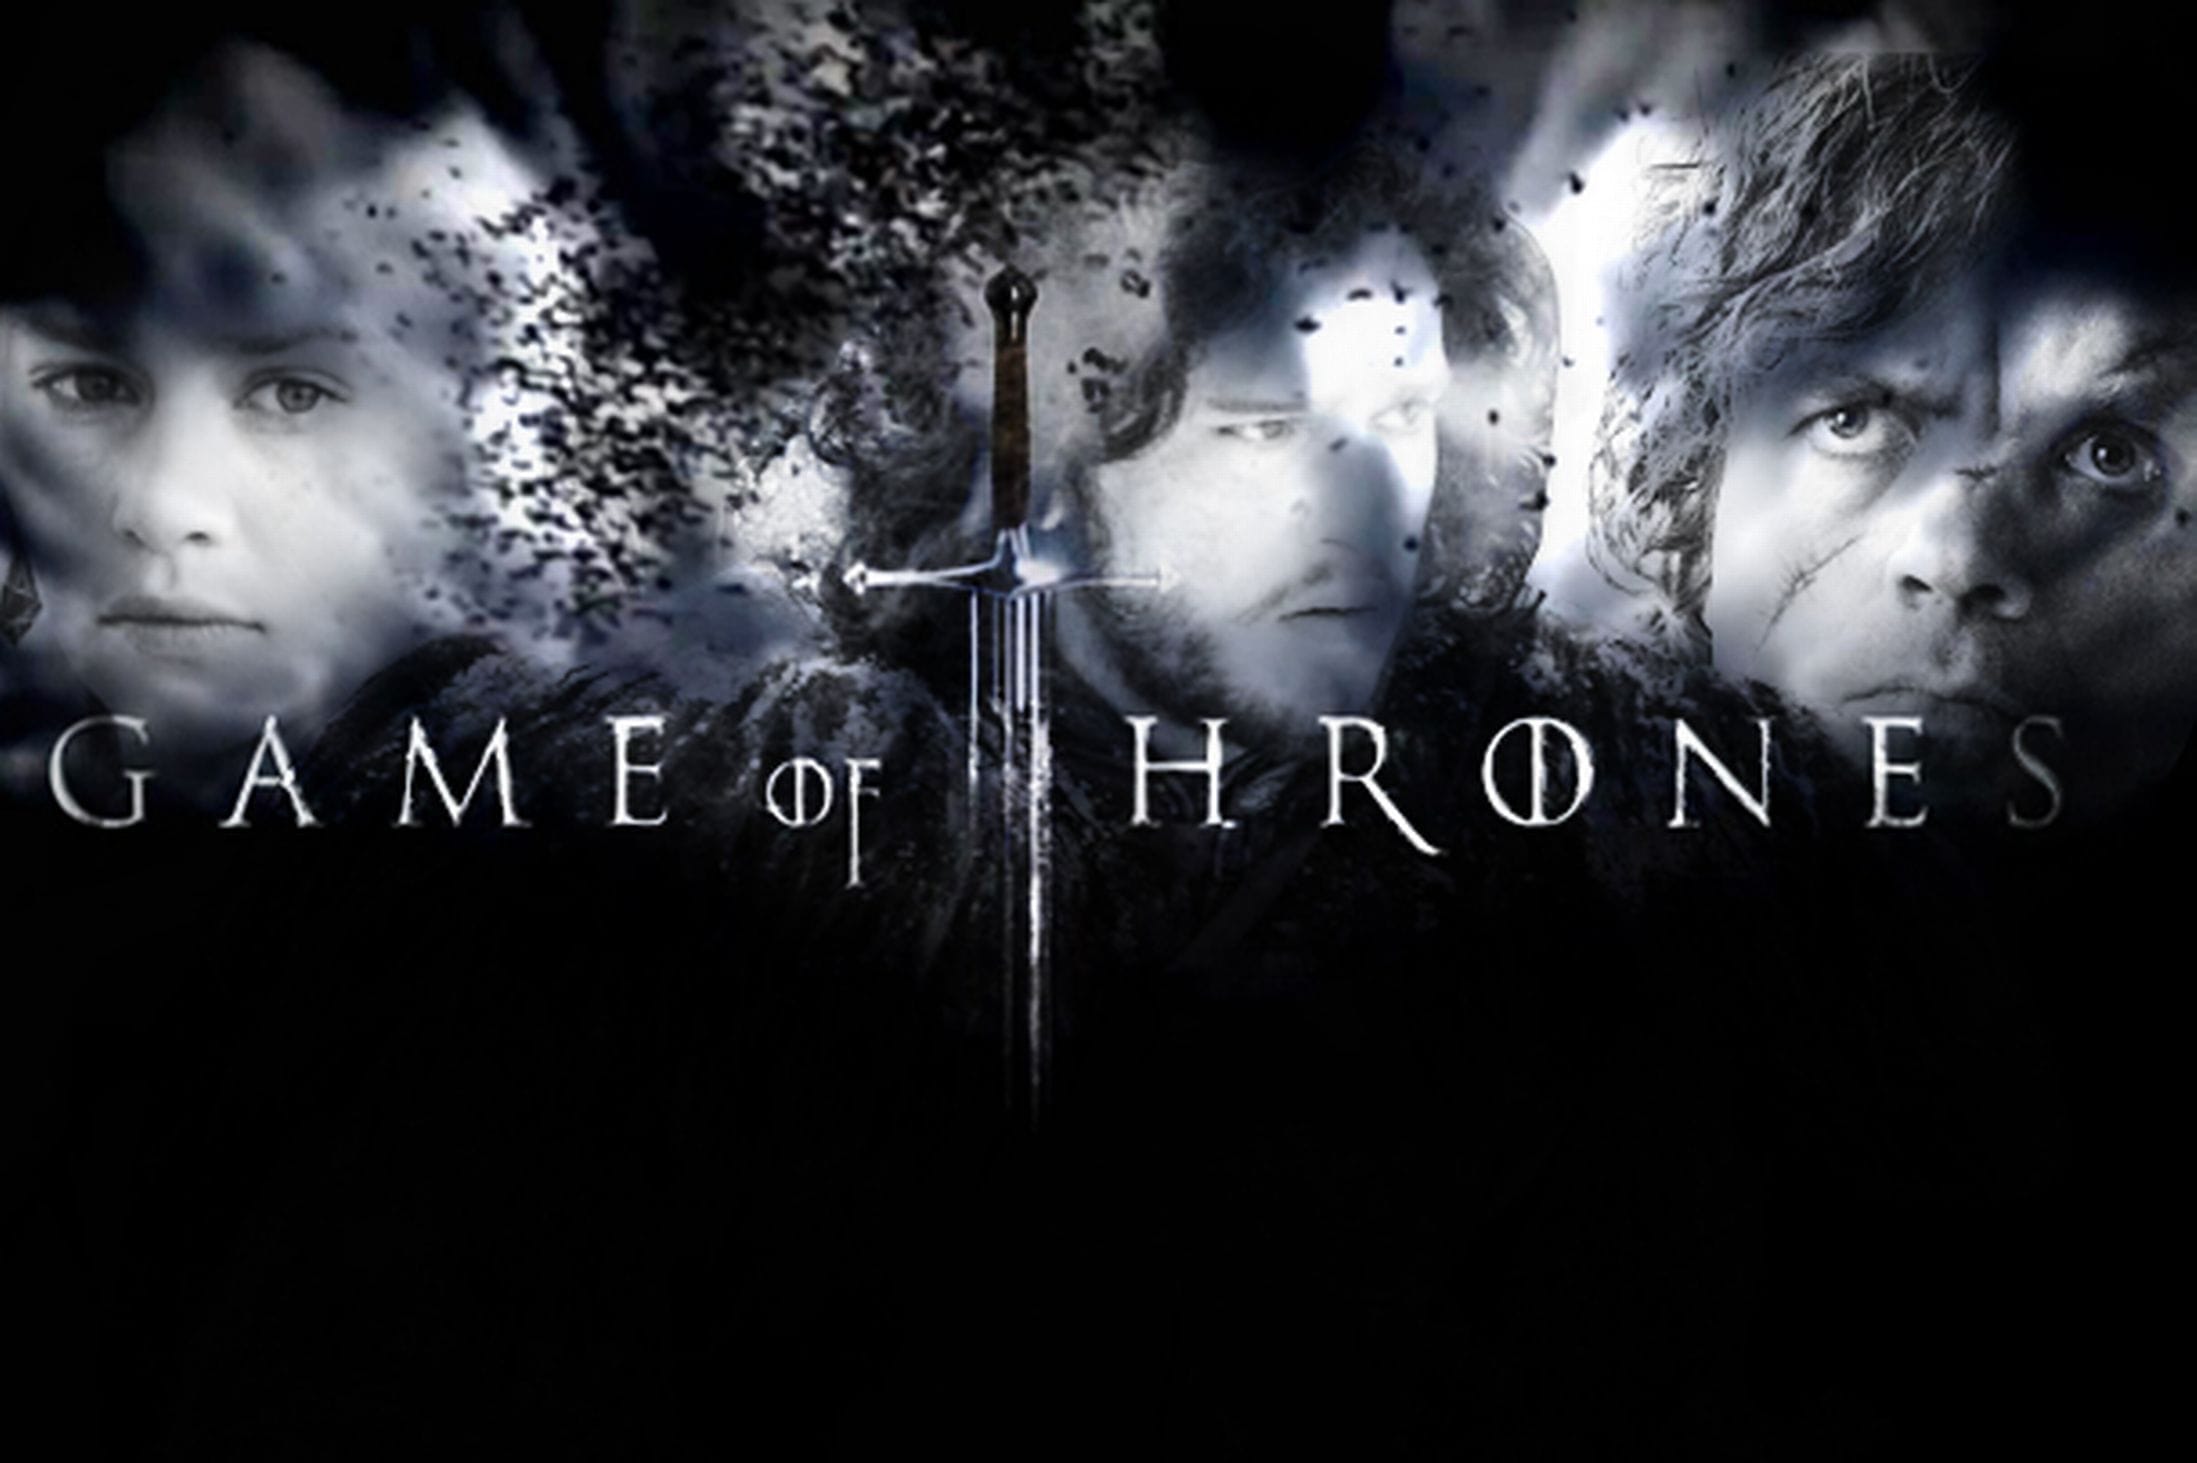 Game of thrones hd wallpapers for pc